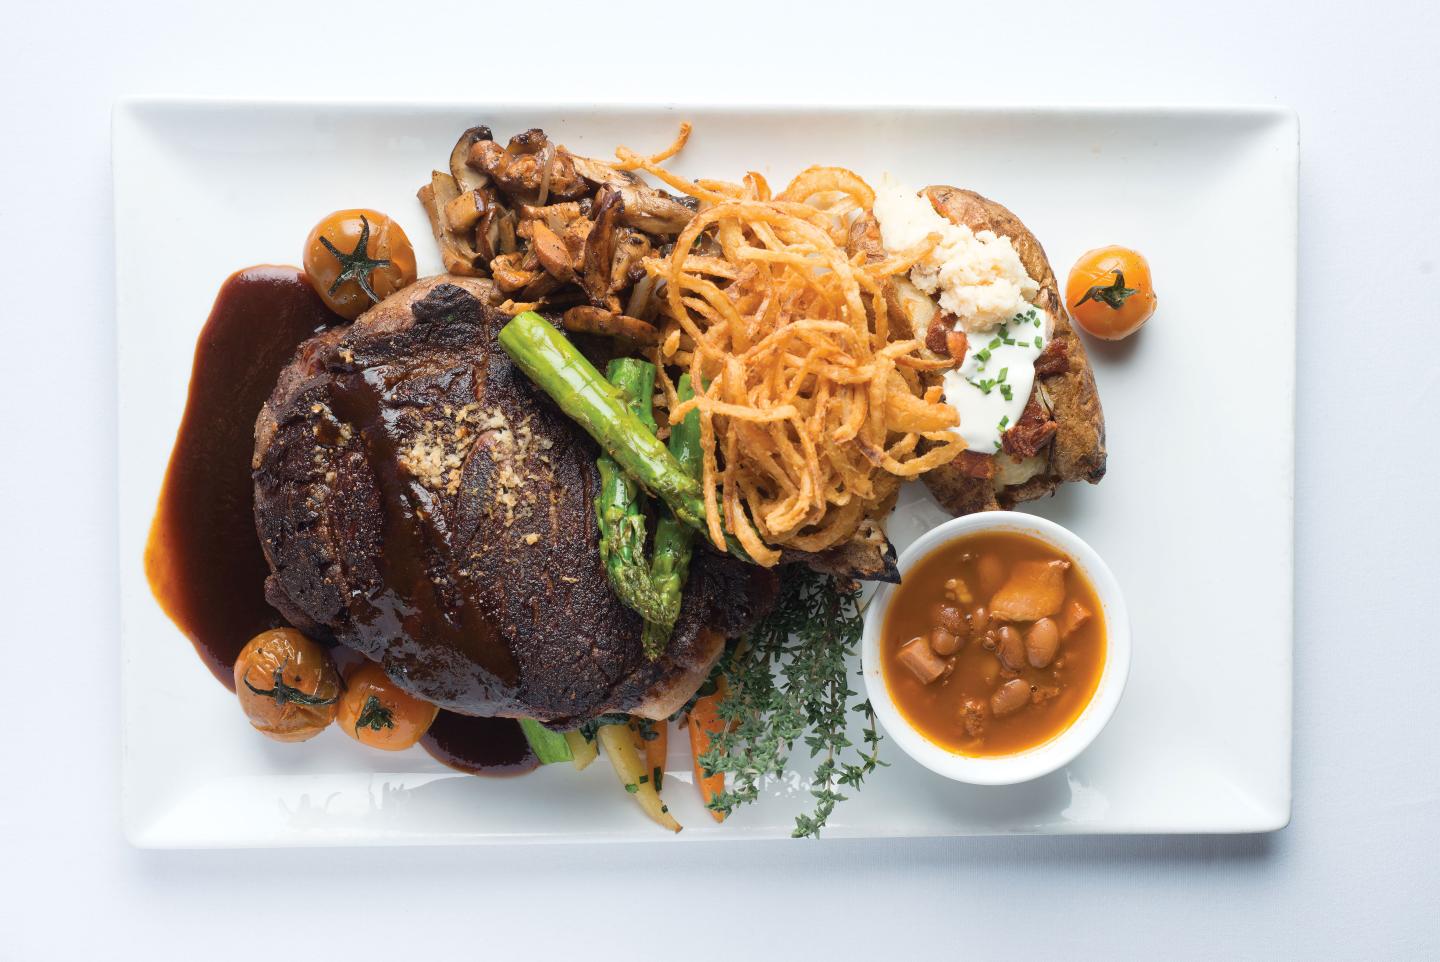 Platos: “Coyote Cafe’s Classic Cowboy Steak with Red Chile Onion Rings”